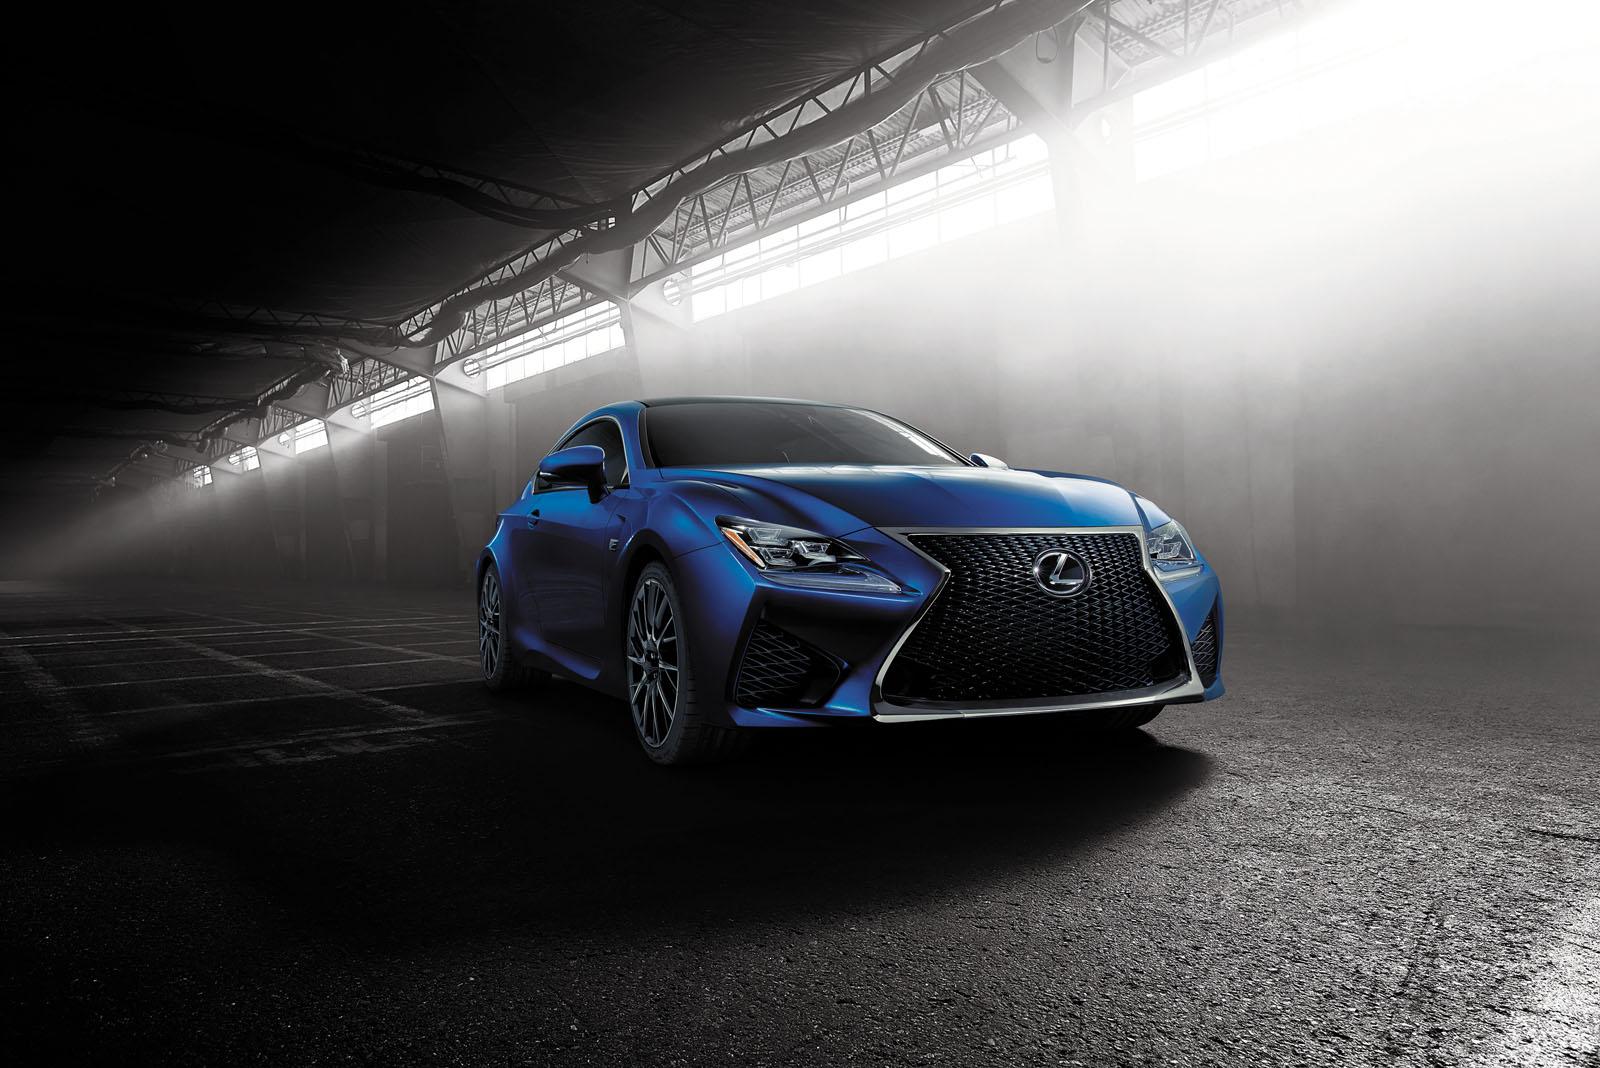 Lexus Rc F Officially Revealed Video Autoevolution